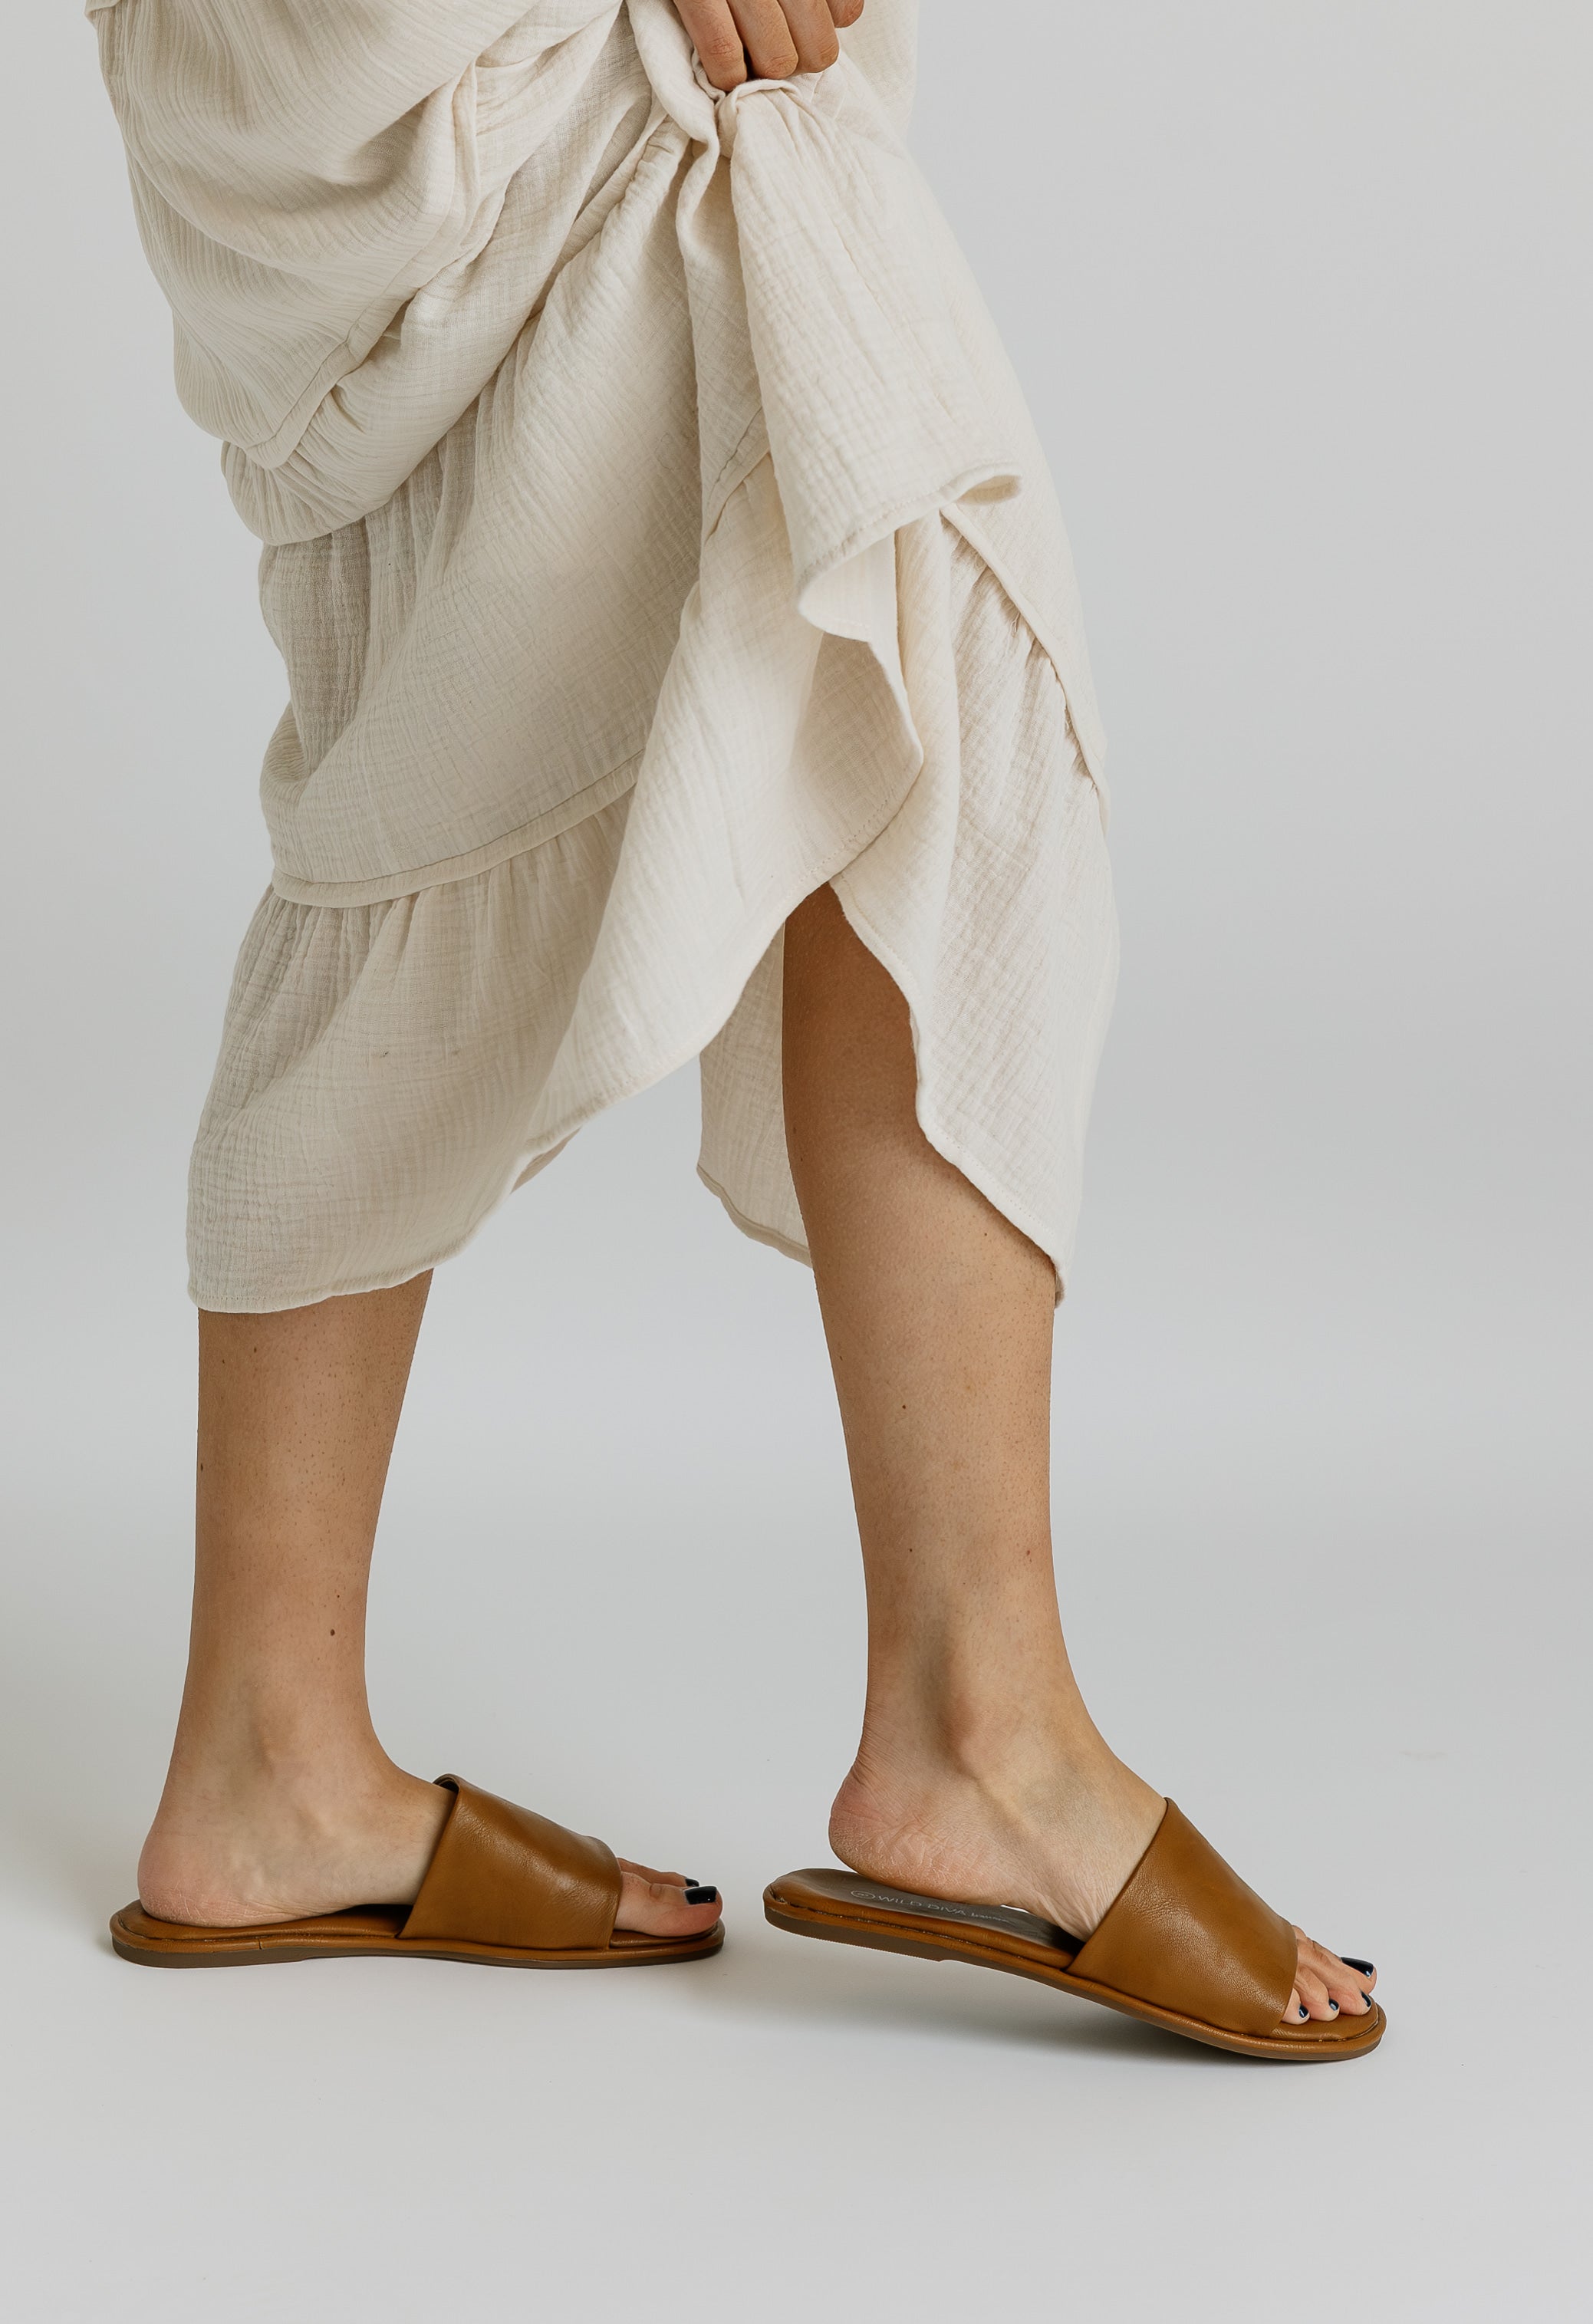 Cairo Sandals - CAMEL - willows clothing Sandals